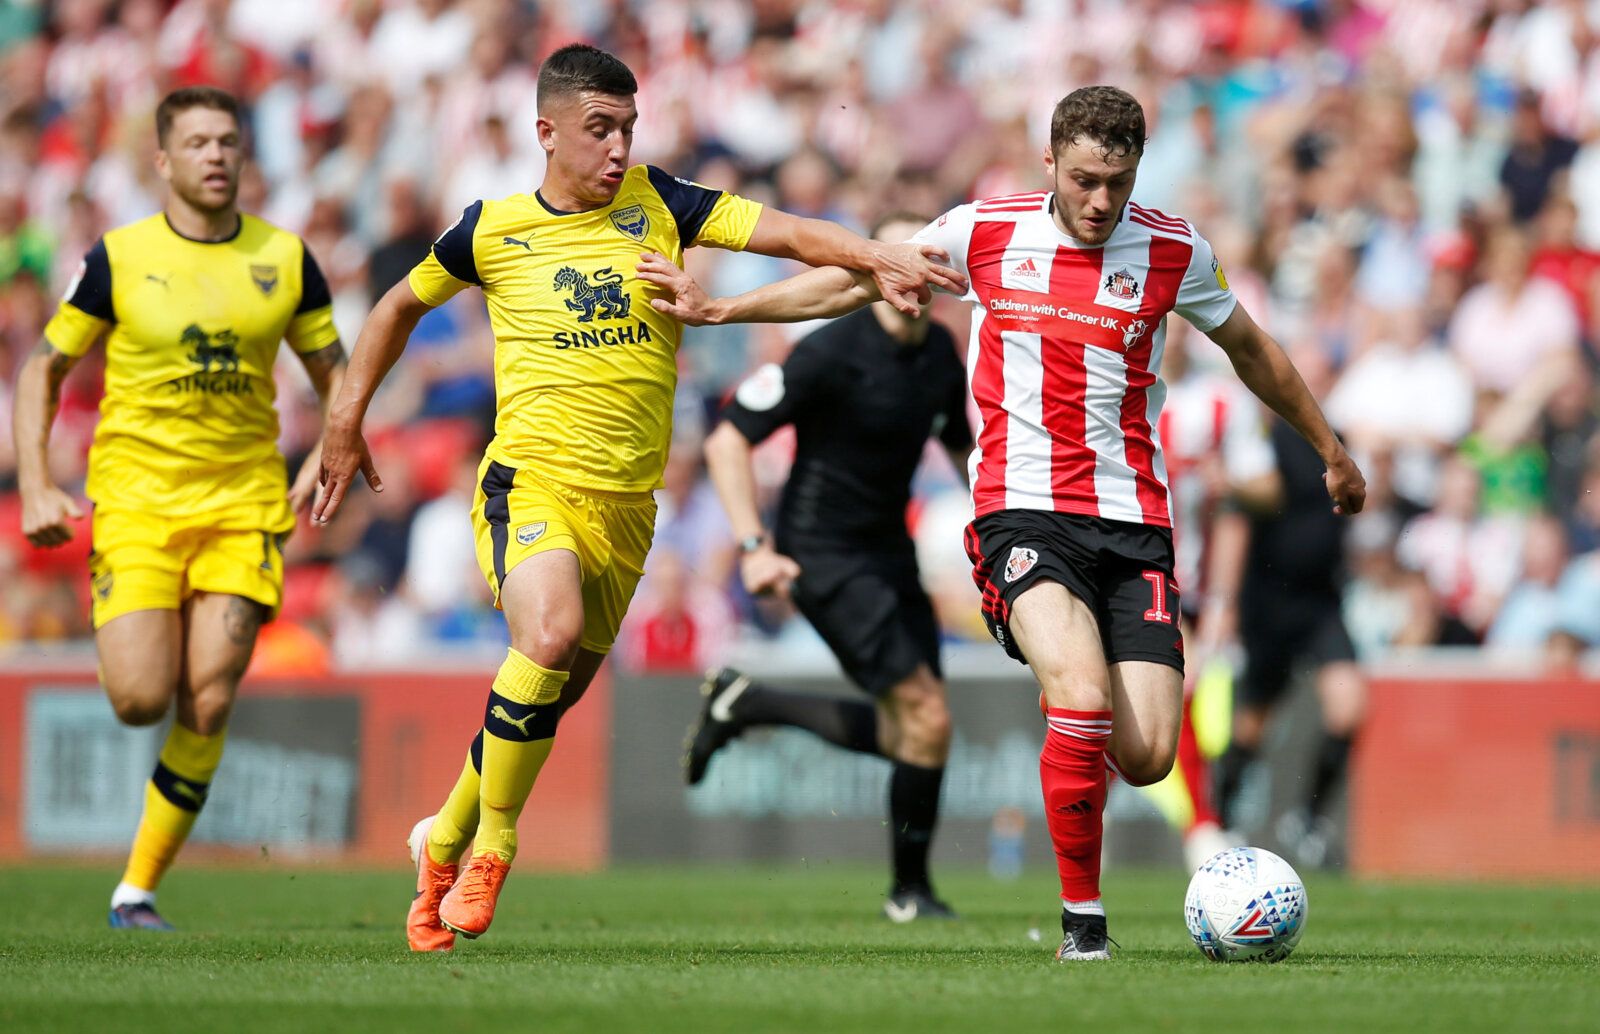 Soccer Football - League One - Sunderland v Oxford United - Stadium of Light, Sunderland, Britain - August 3, 2019  Oxford United's Cameron Brannagan in action with Sunderland's Elliot Embleton  Action Images/Ed Sykes  EDITORIAL USE ONLY. No use with unauthorized audio, video, data, fixture lists, club/league logos or "live" services. Online in-match use limited to 75 images, no video emulation. No use in betting, games or single club/league/player publications.  Please contact your account repr